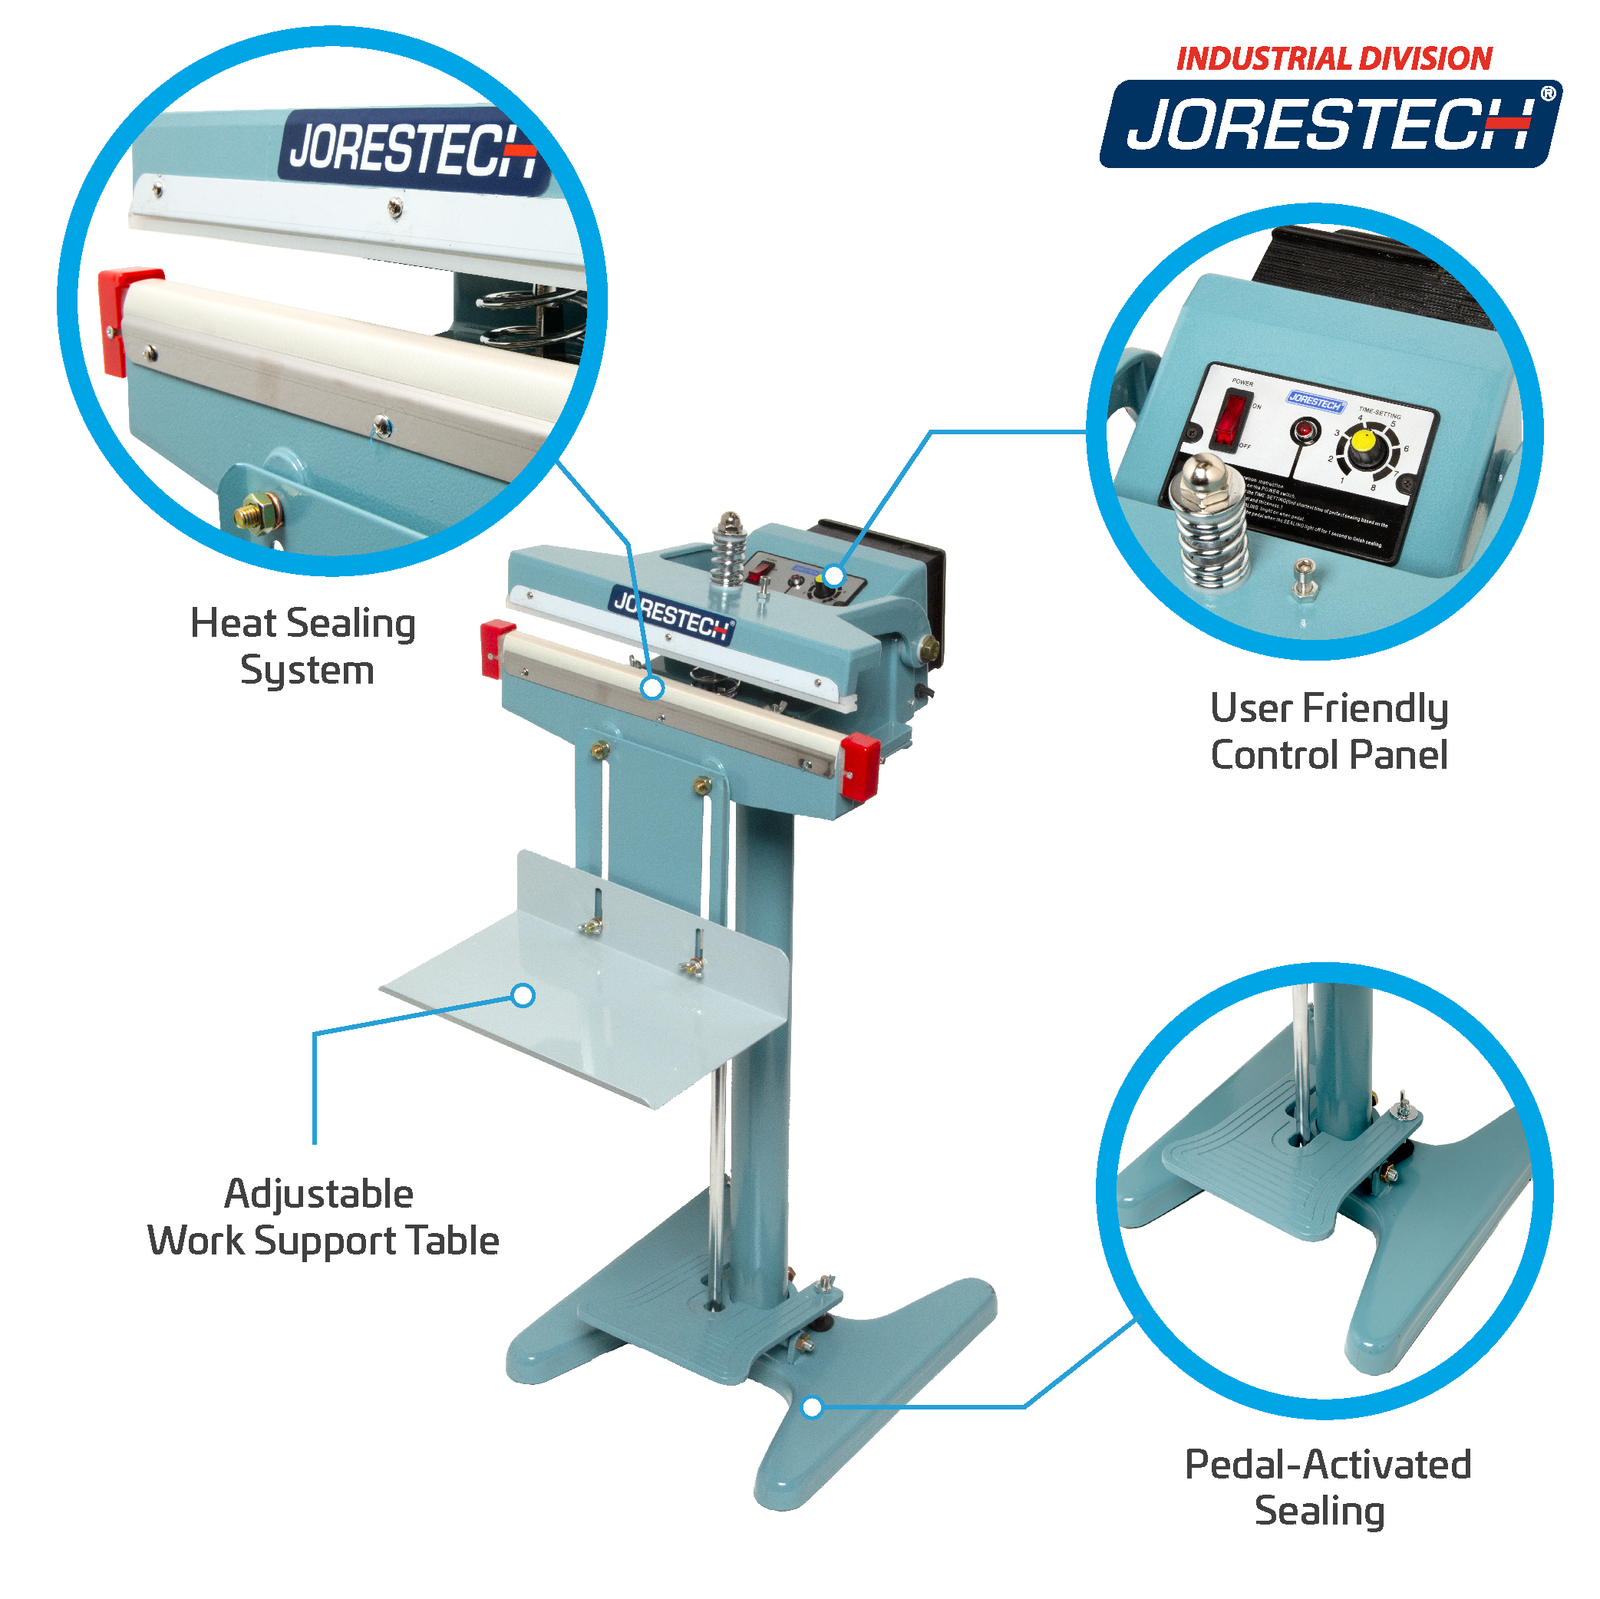 Infographic shows blue JORESTECH foot impulse bag sealer over white background. Highlighted features include Heat Sealing System, User Friendly Control Panel, Pedal-Activated Sealing, and Adjustable Work Support Table. Close-ups of sealing element, foot pedal, and control panel.